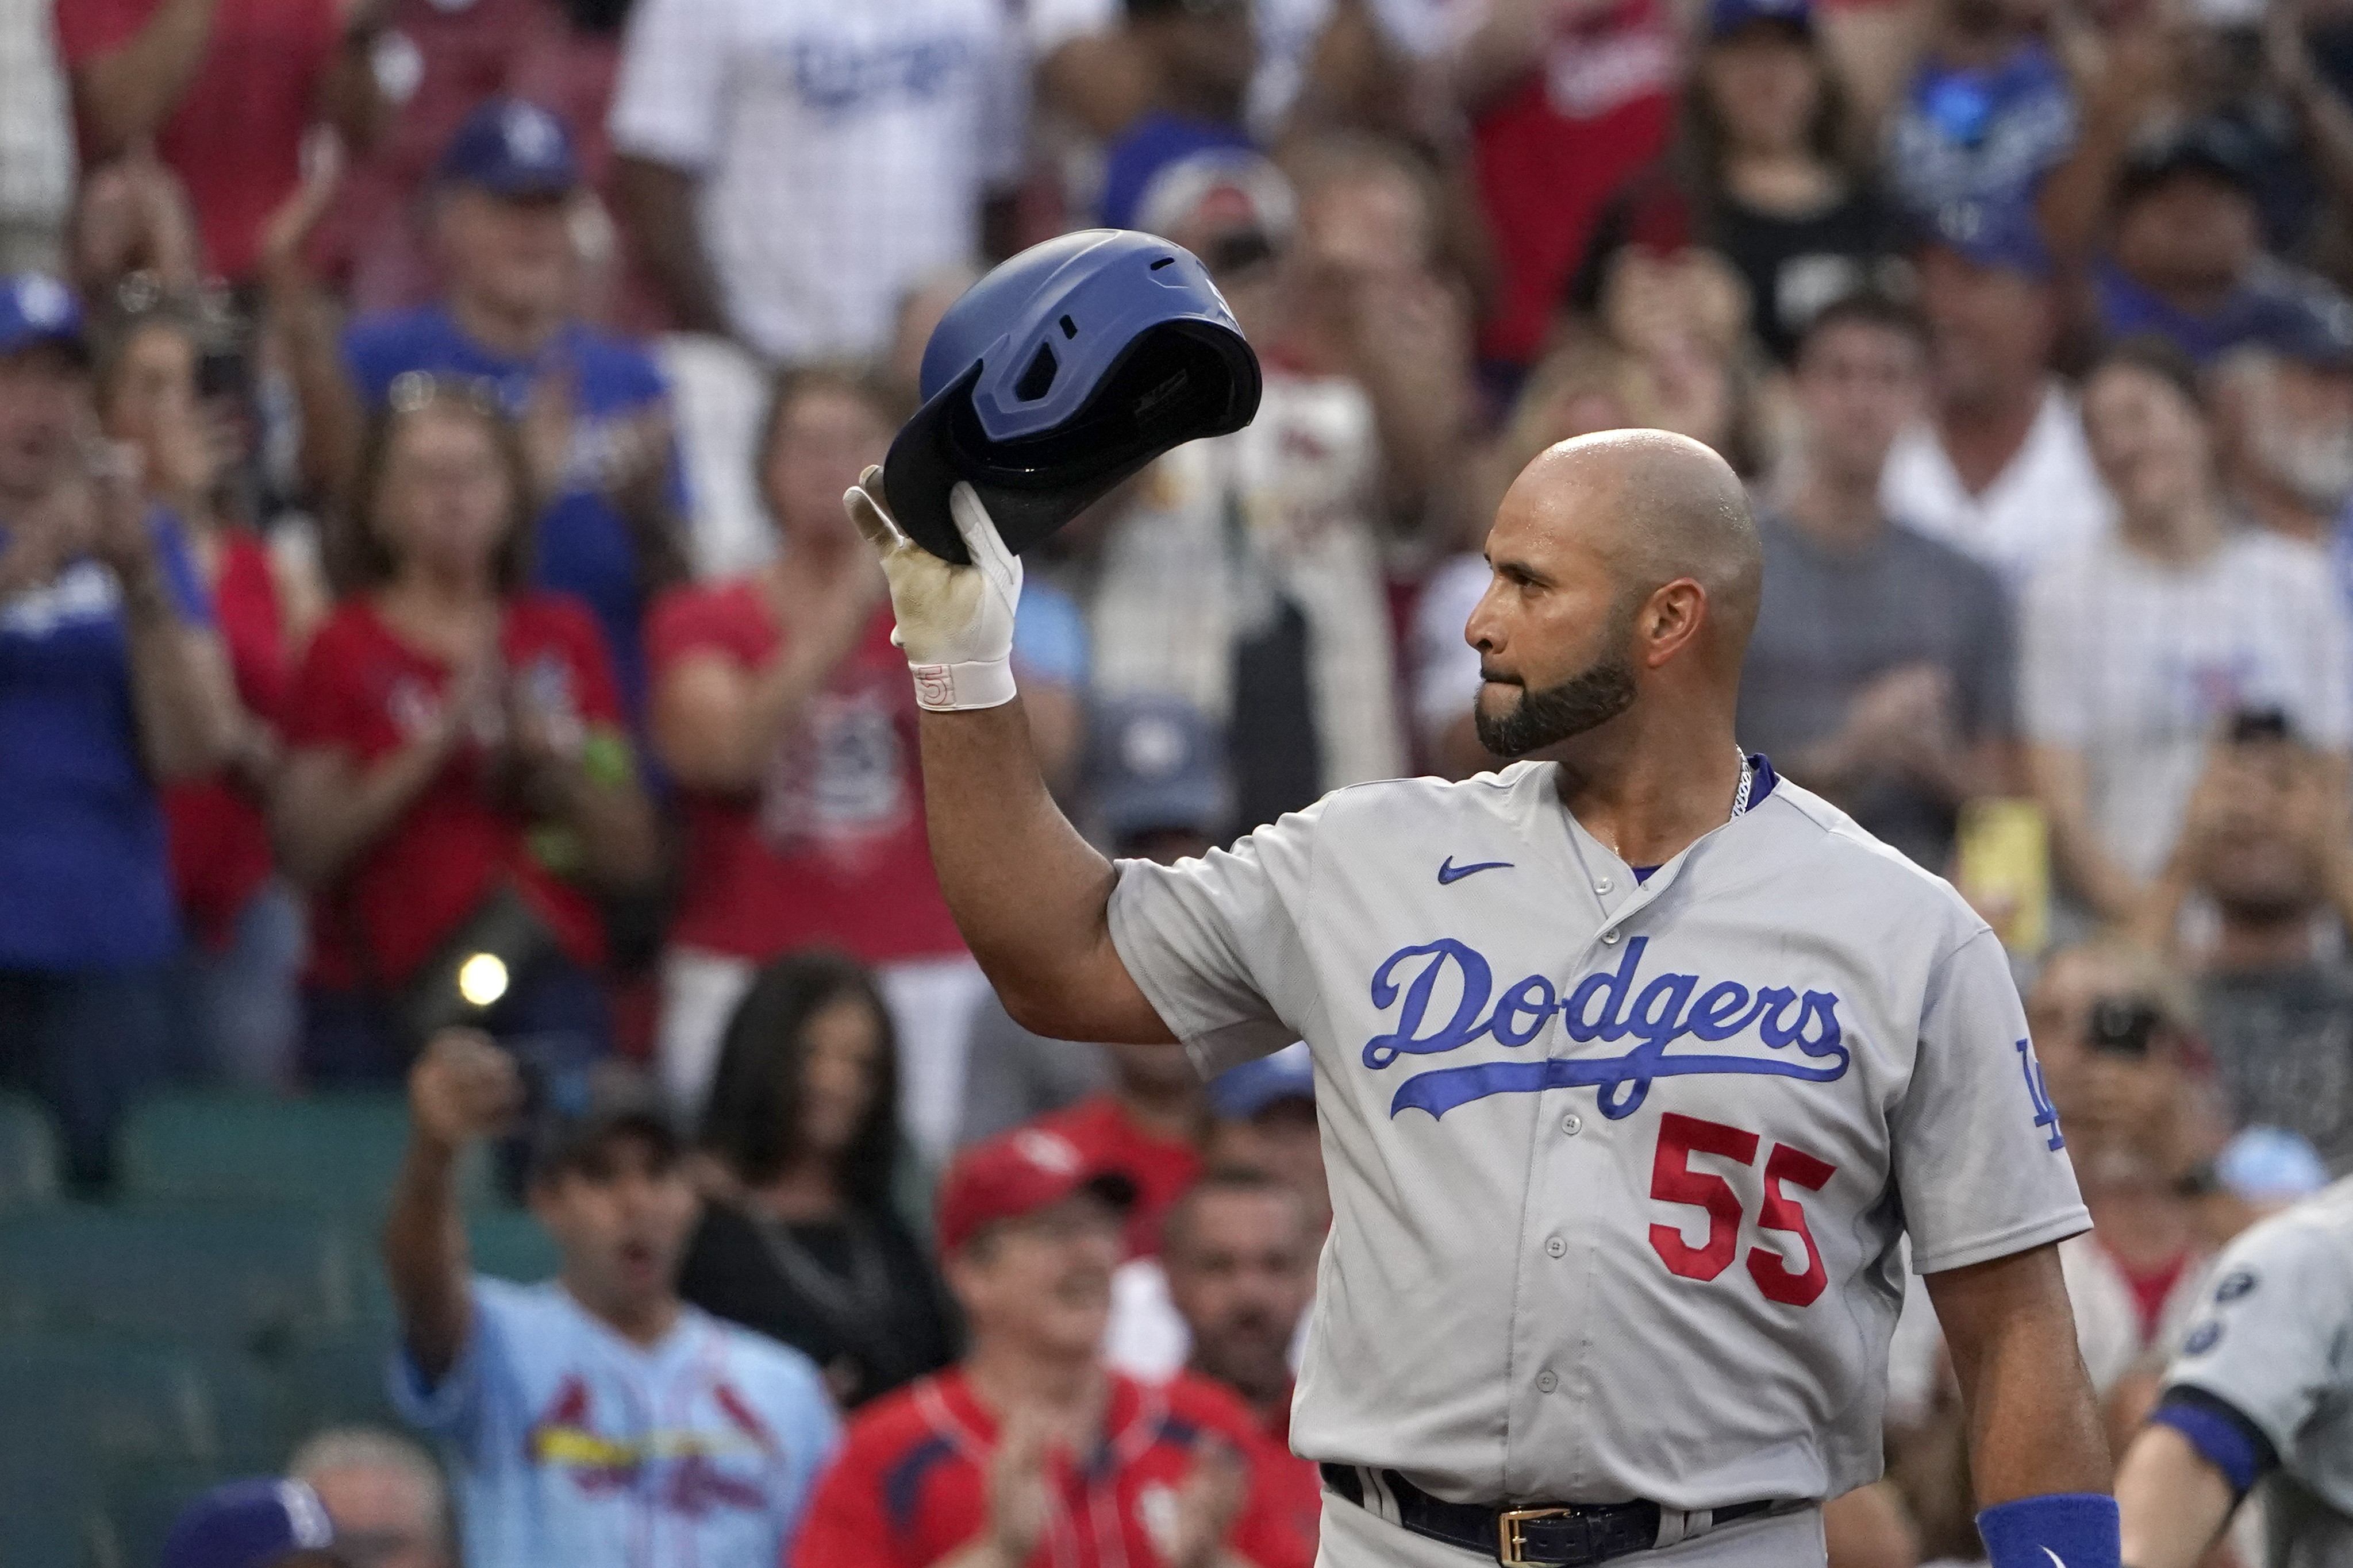 Albert Pujols taking in the Cards/Dodgers game : r/baseball